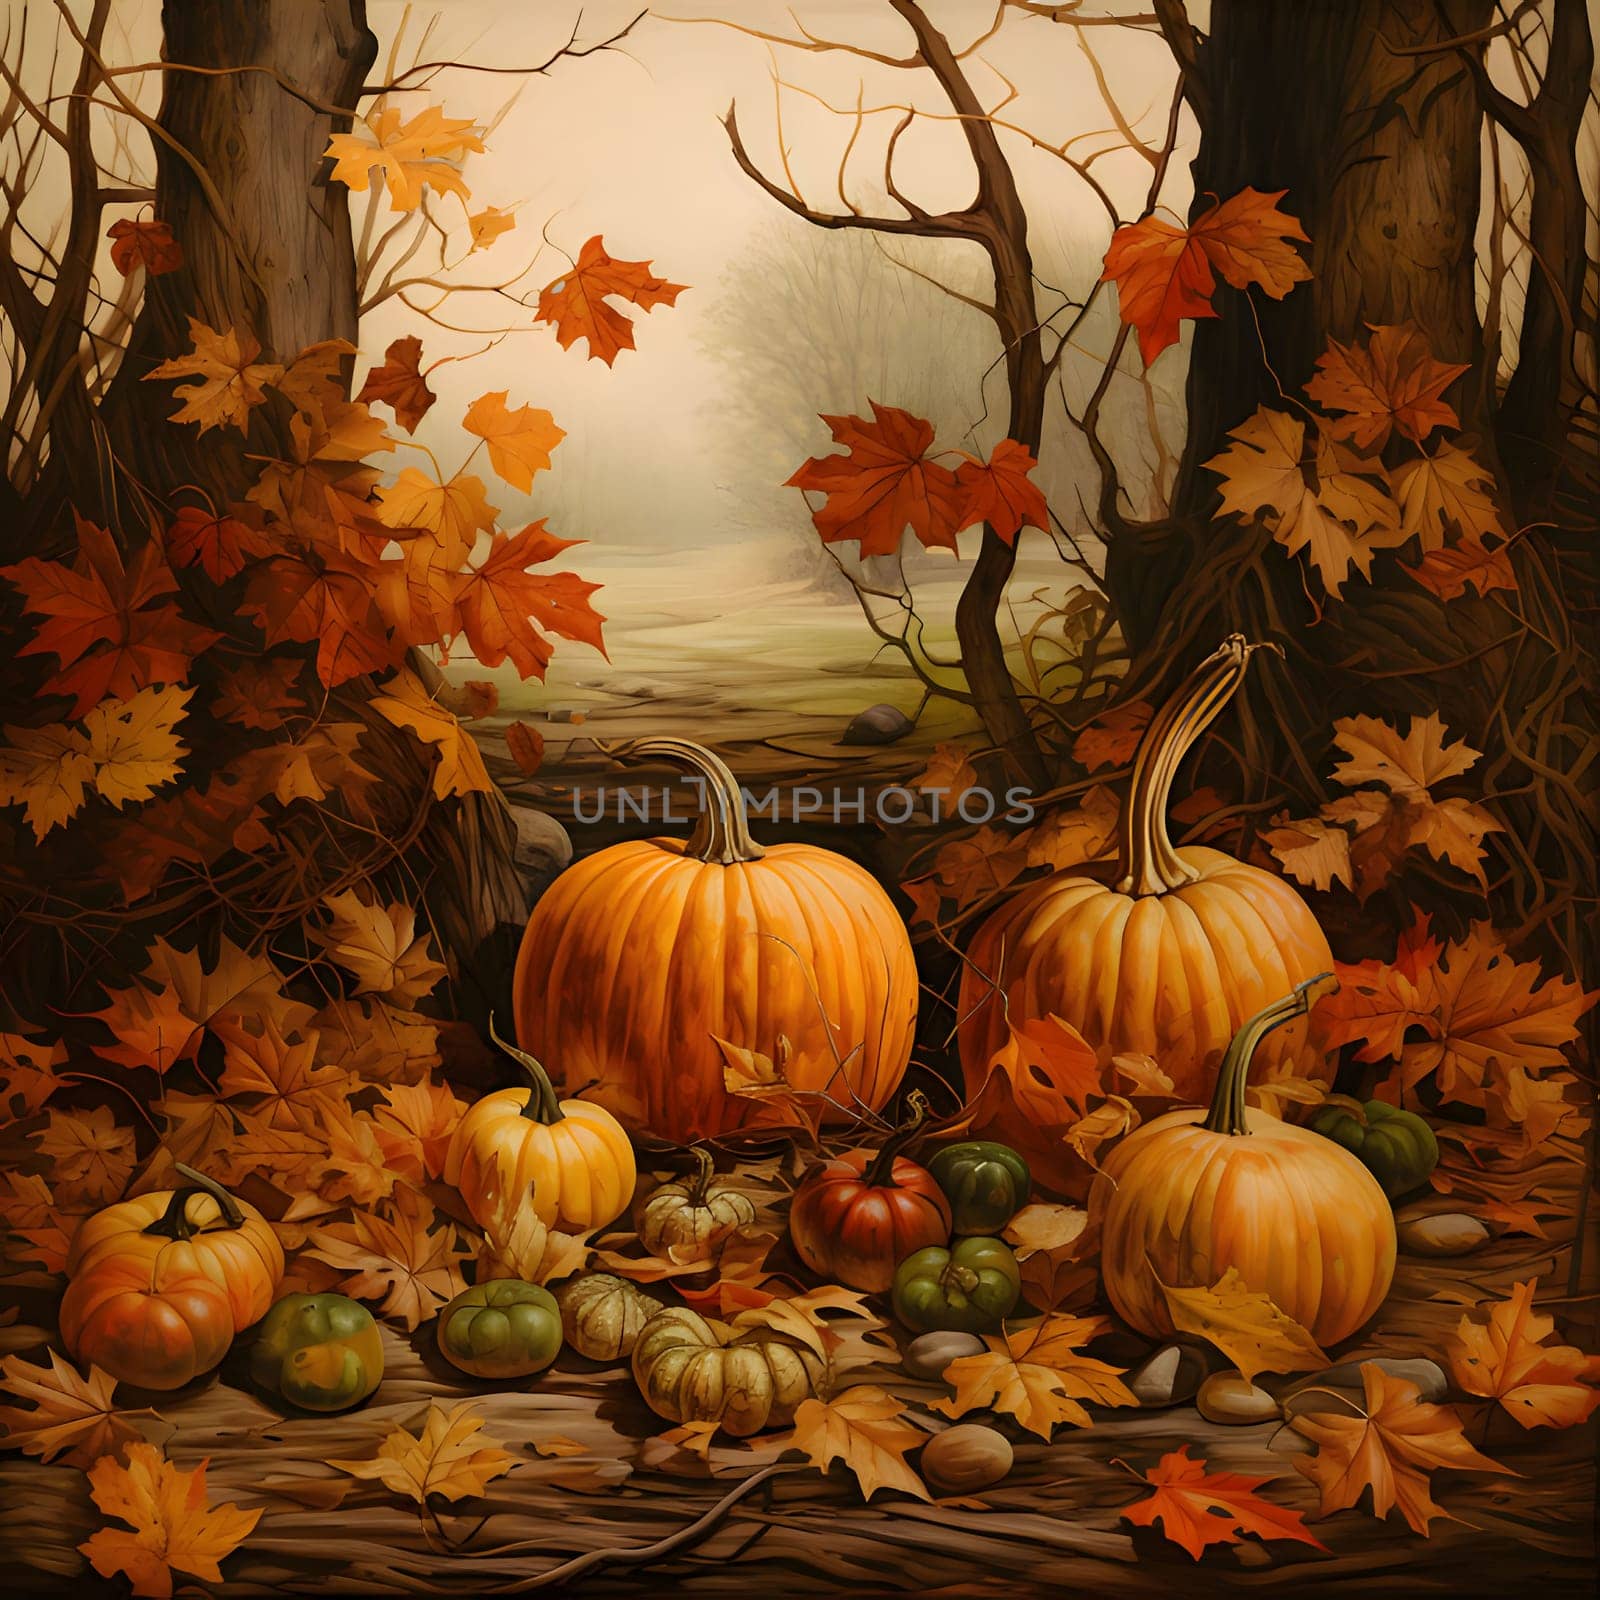 Autumn season leaves falling from the trees and pumpkins all around. Pumpkin as a dish of thanksgiving for the harvest. by ThemesS